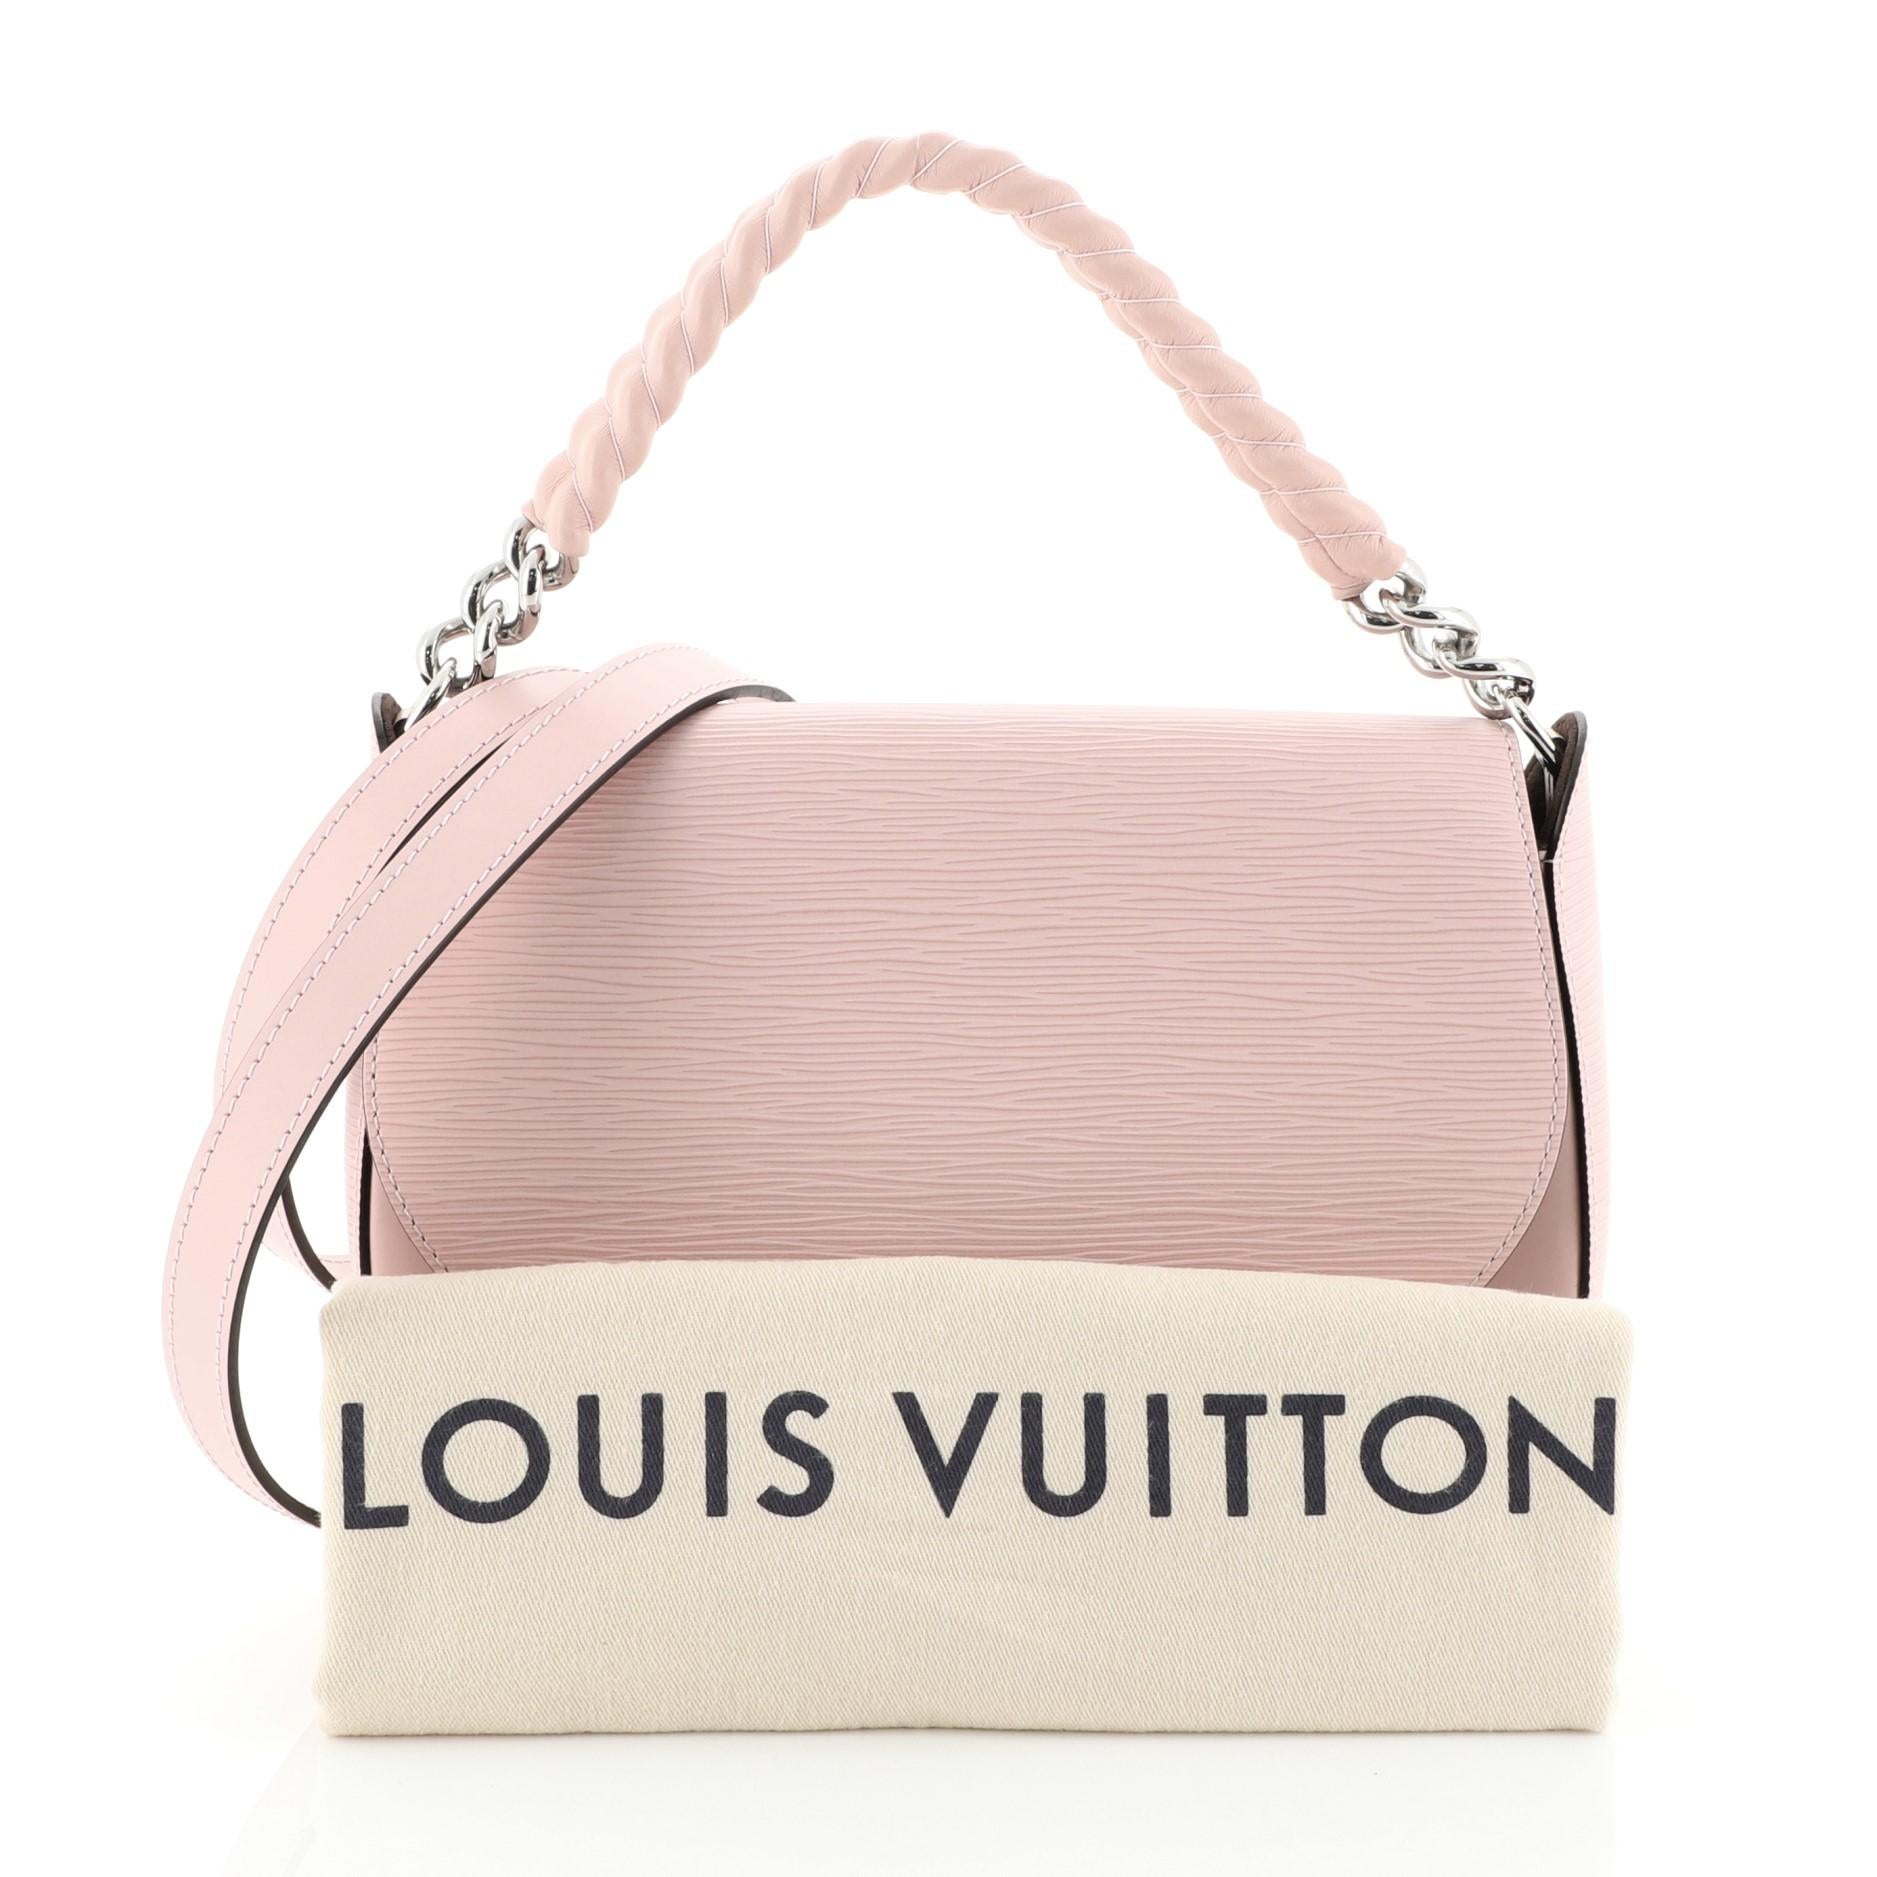 This Louis Vuitton Luna Handbag Epi Leather, crafted in pink epi leather, features a structured and sleek shape, chain-link handle covered in sheepskin, detachable strap, LV signature logo at front and silver-tone hardware. Its magnetic snap button